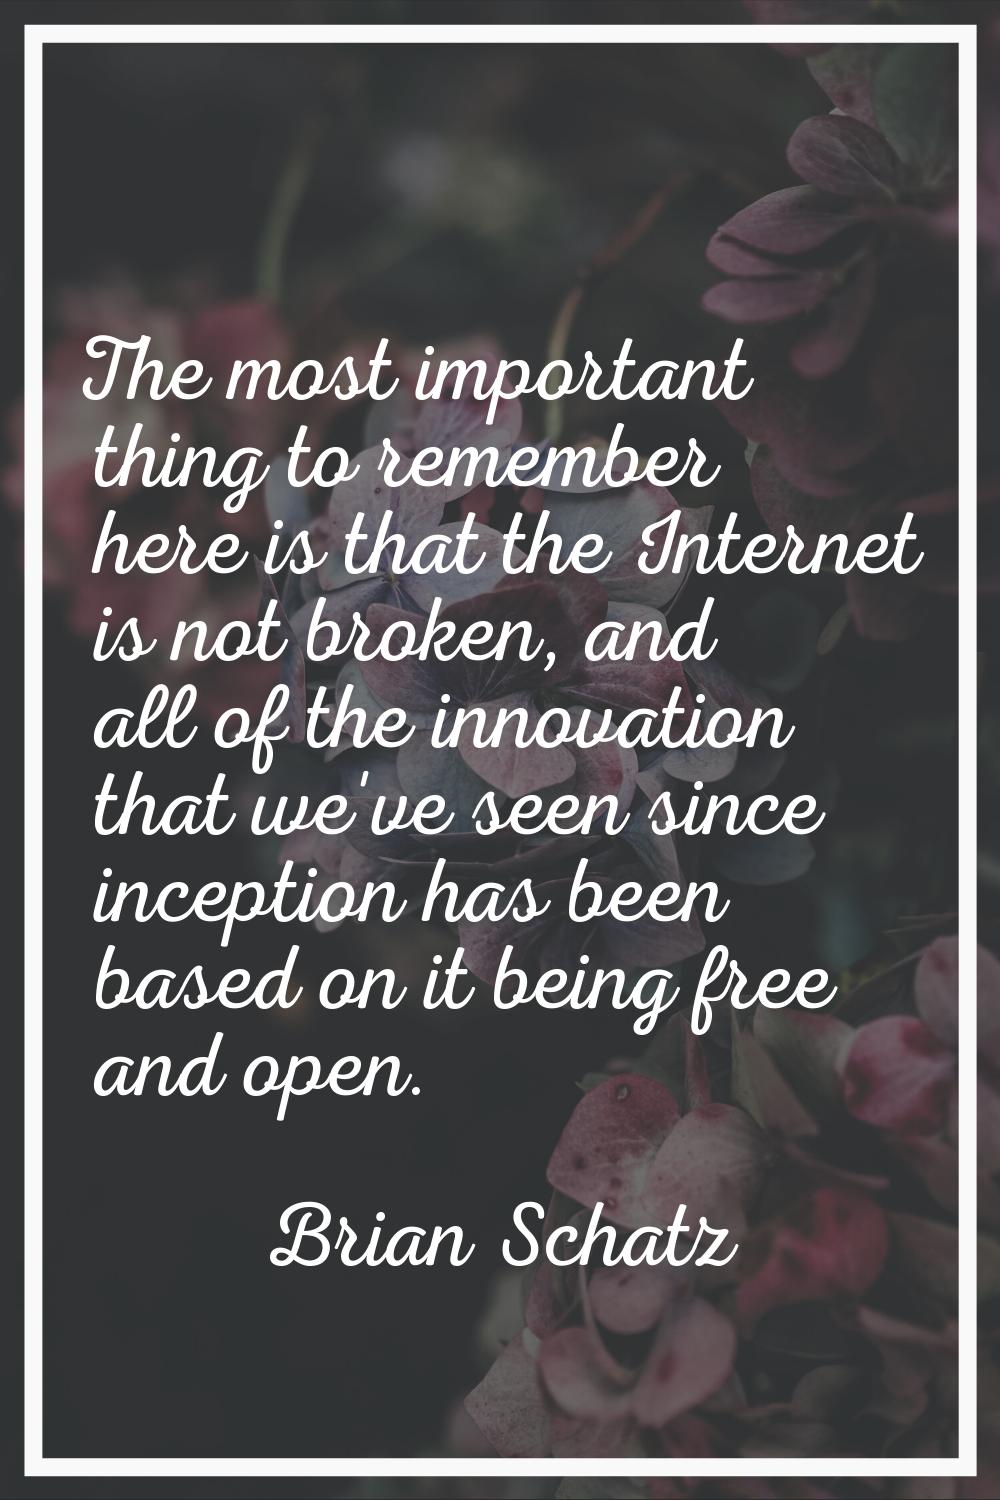 The most important thing to remember here is that the Internet is not broken, and all of the innova